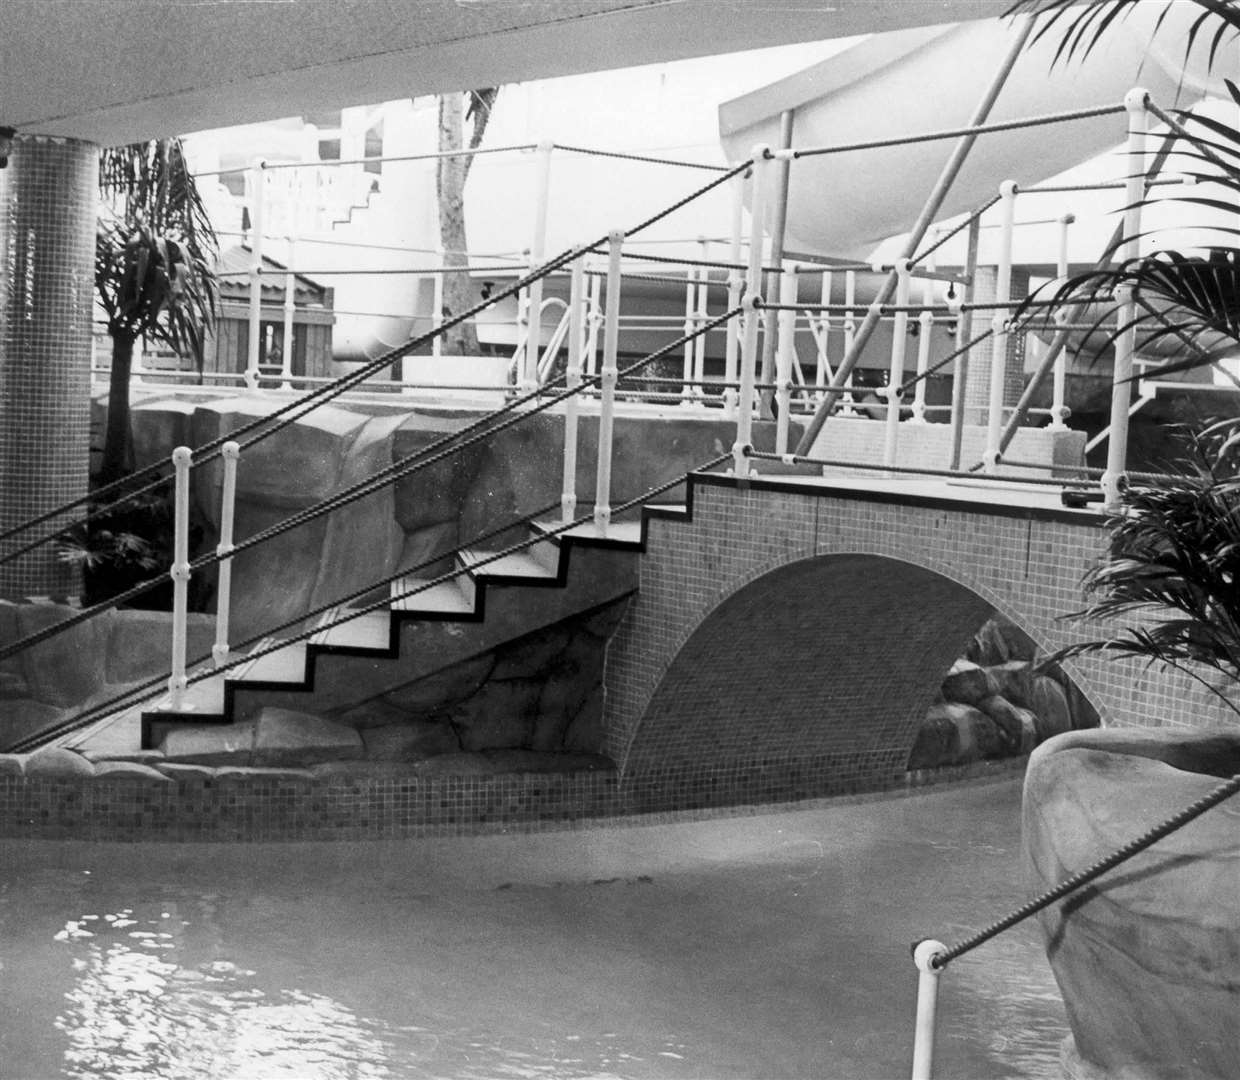 One of the inside pools at Fantaseas pictured in 1989